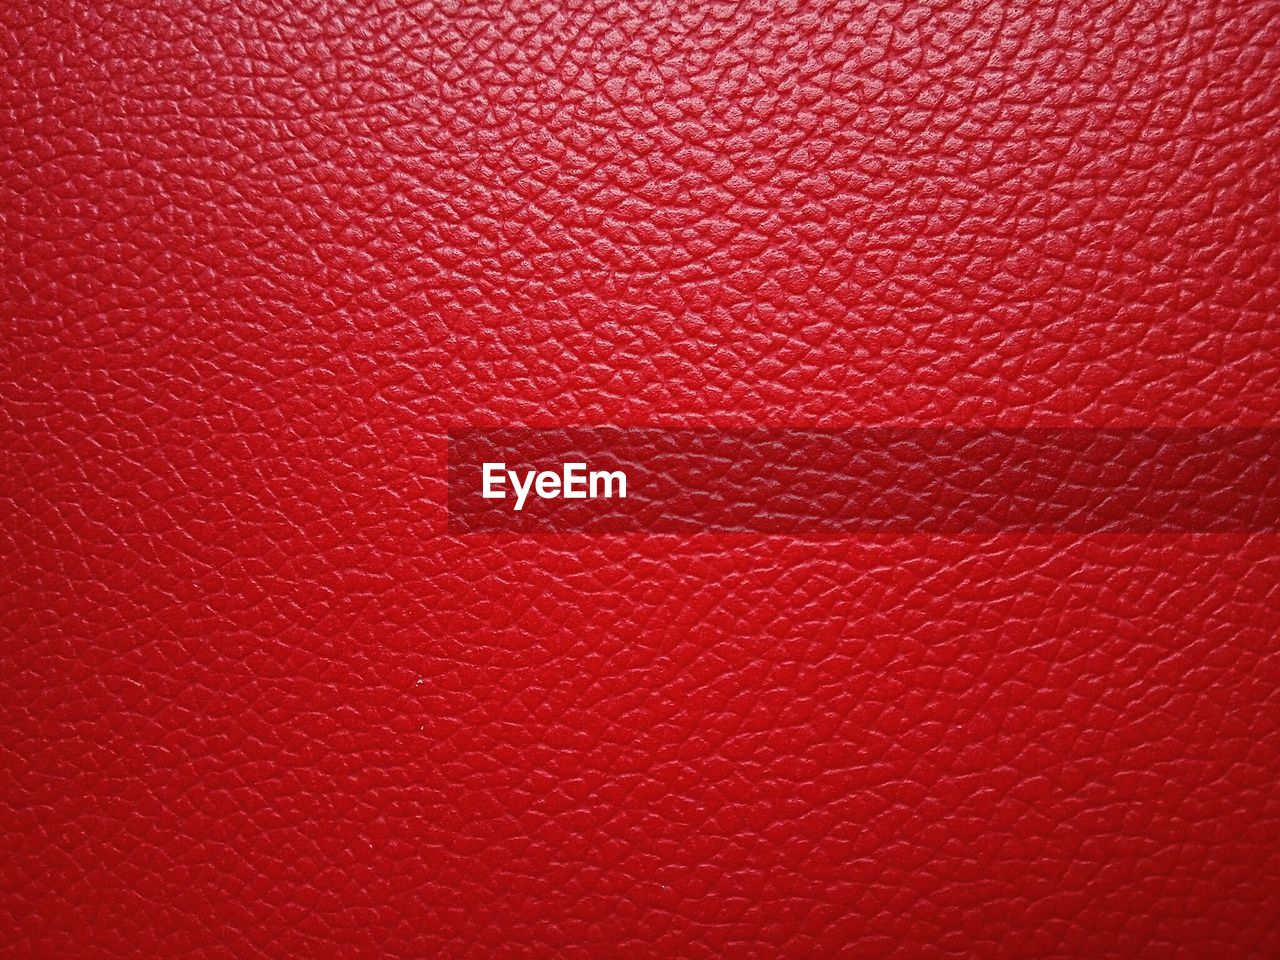 Full frame shot of red leather